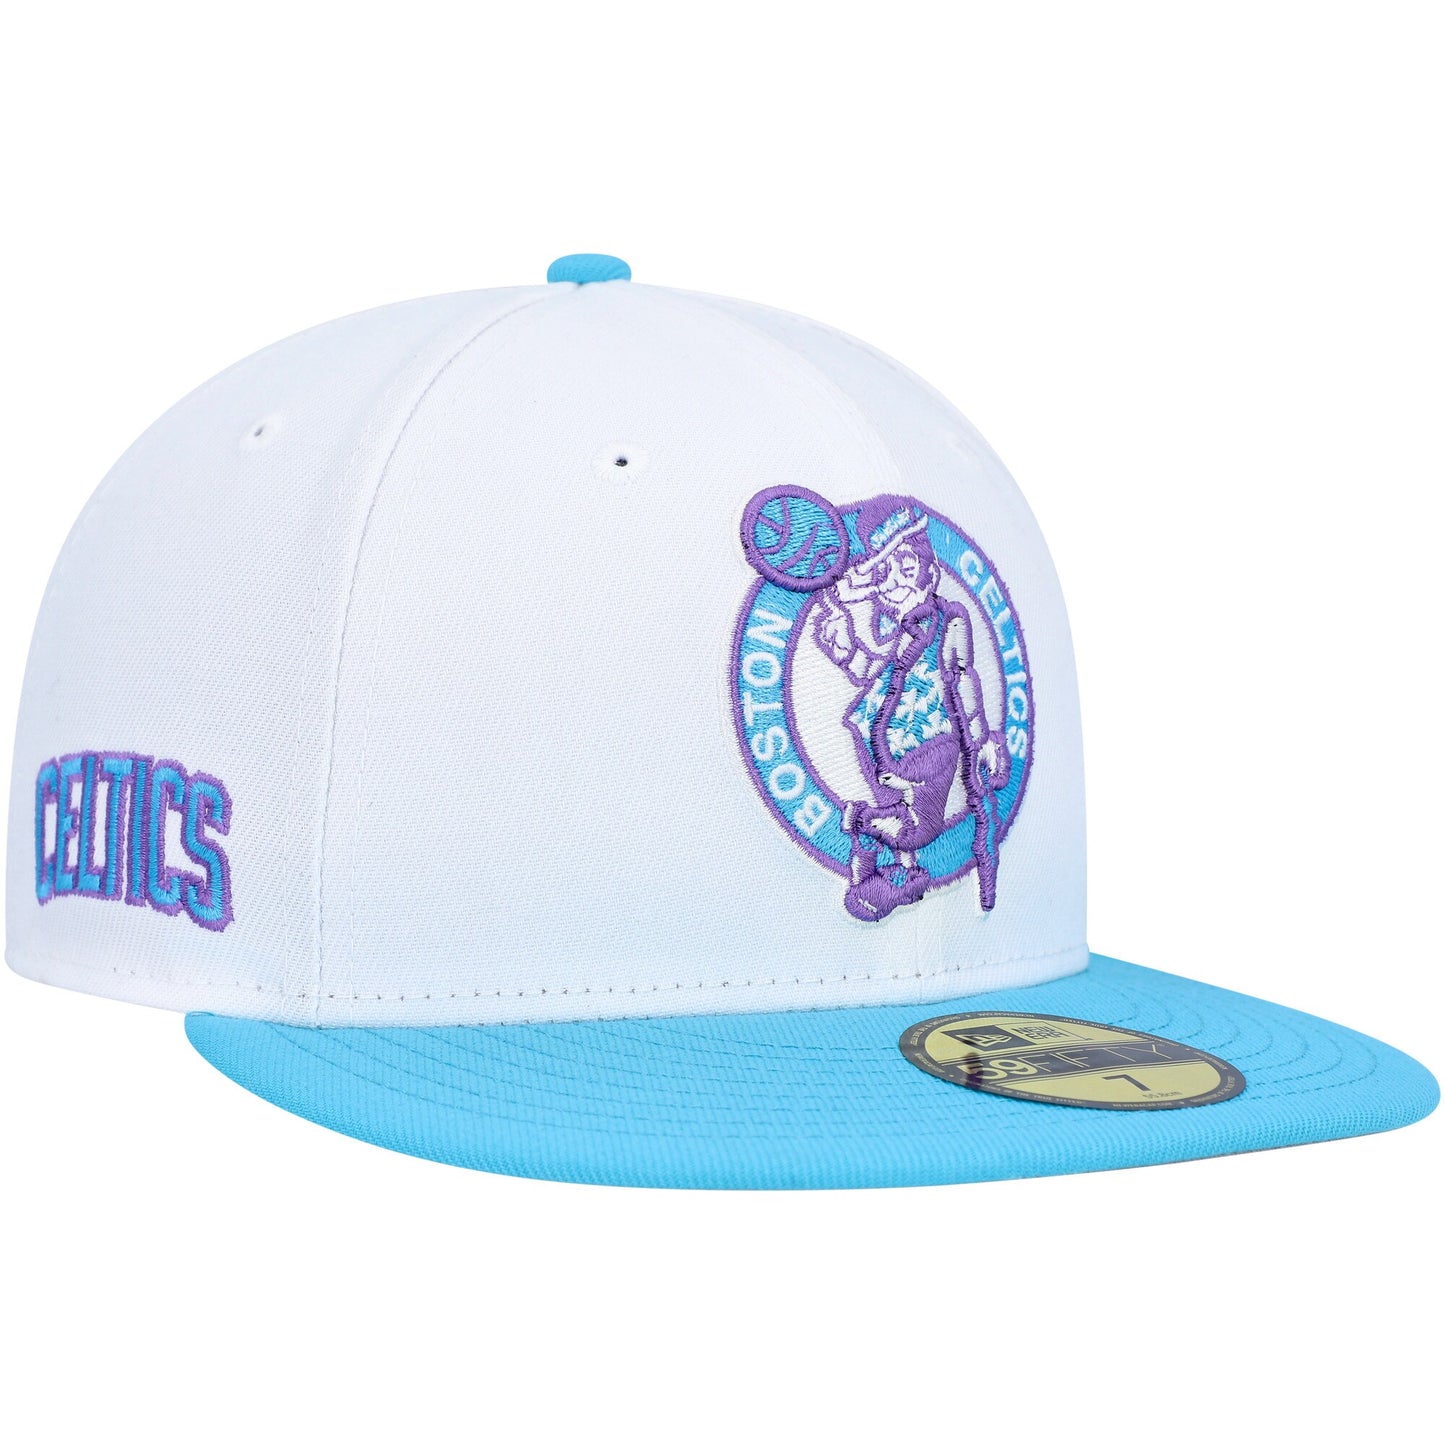 Boston Celtics New Era Vice Blue Side Patch 59FIFTY Fitted Hat - White